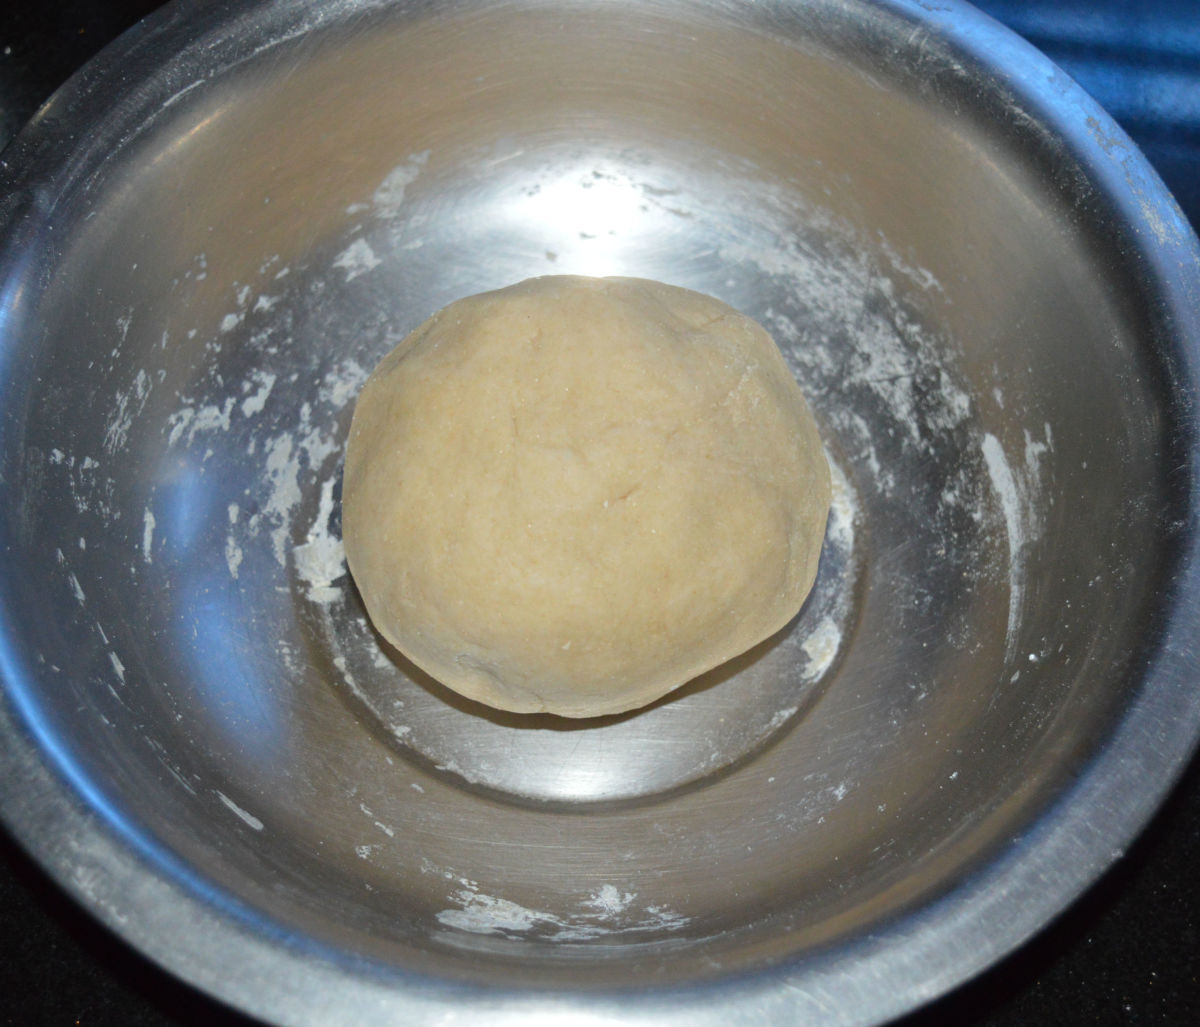 Step one: Make a firm, soft, and pliable dough as per instructions. Cover it and keep aside.